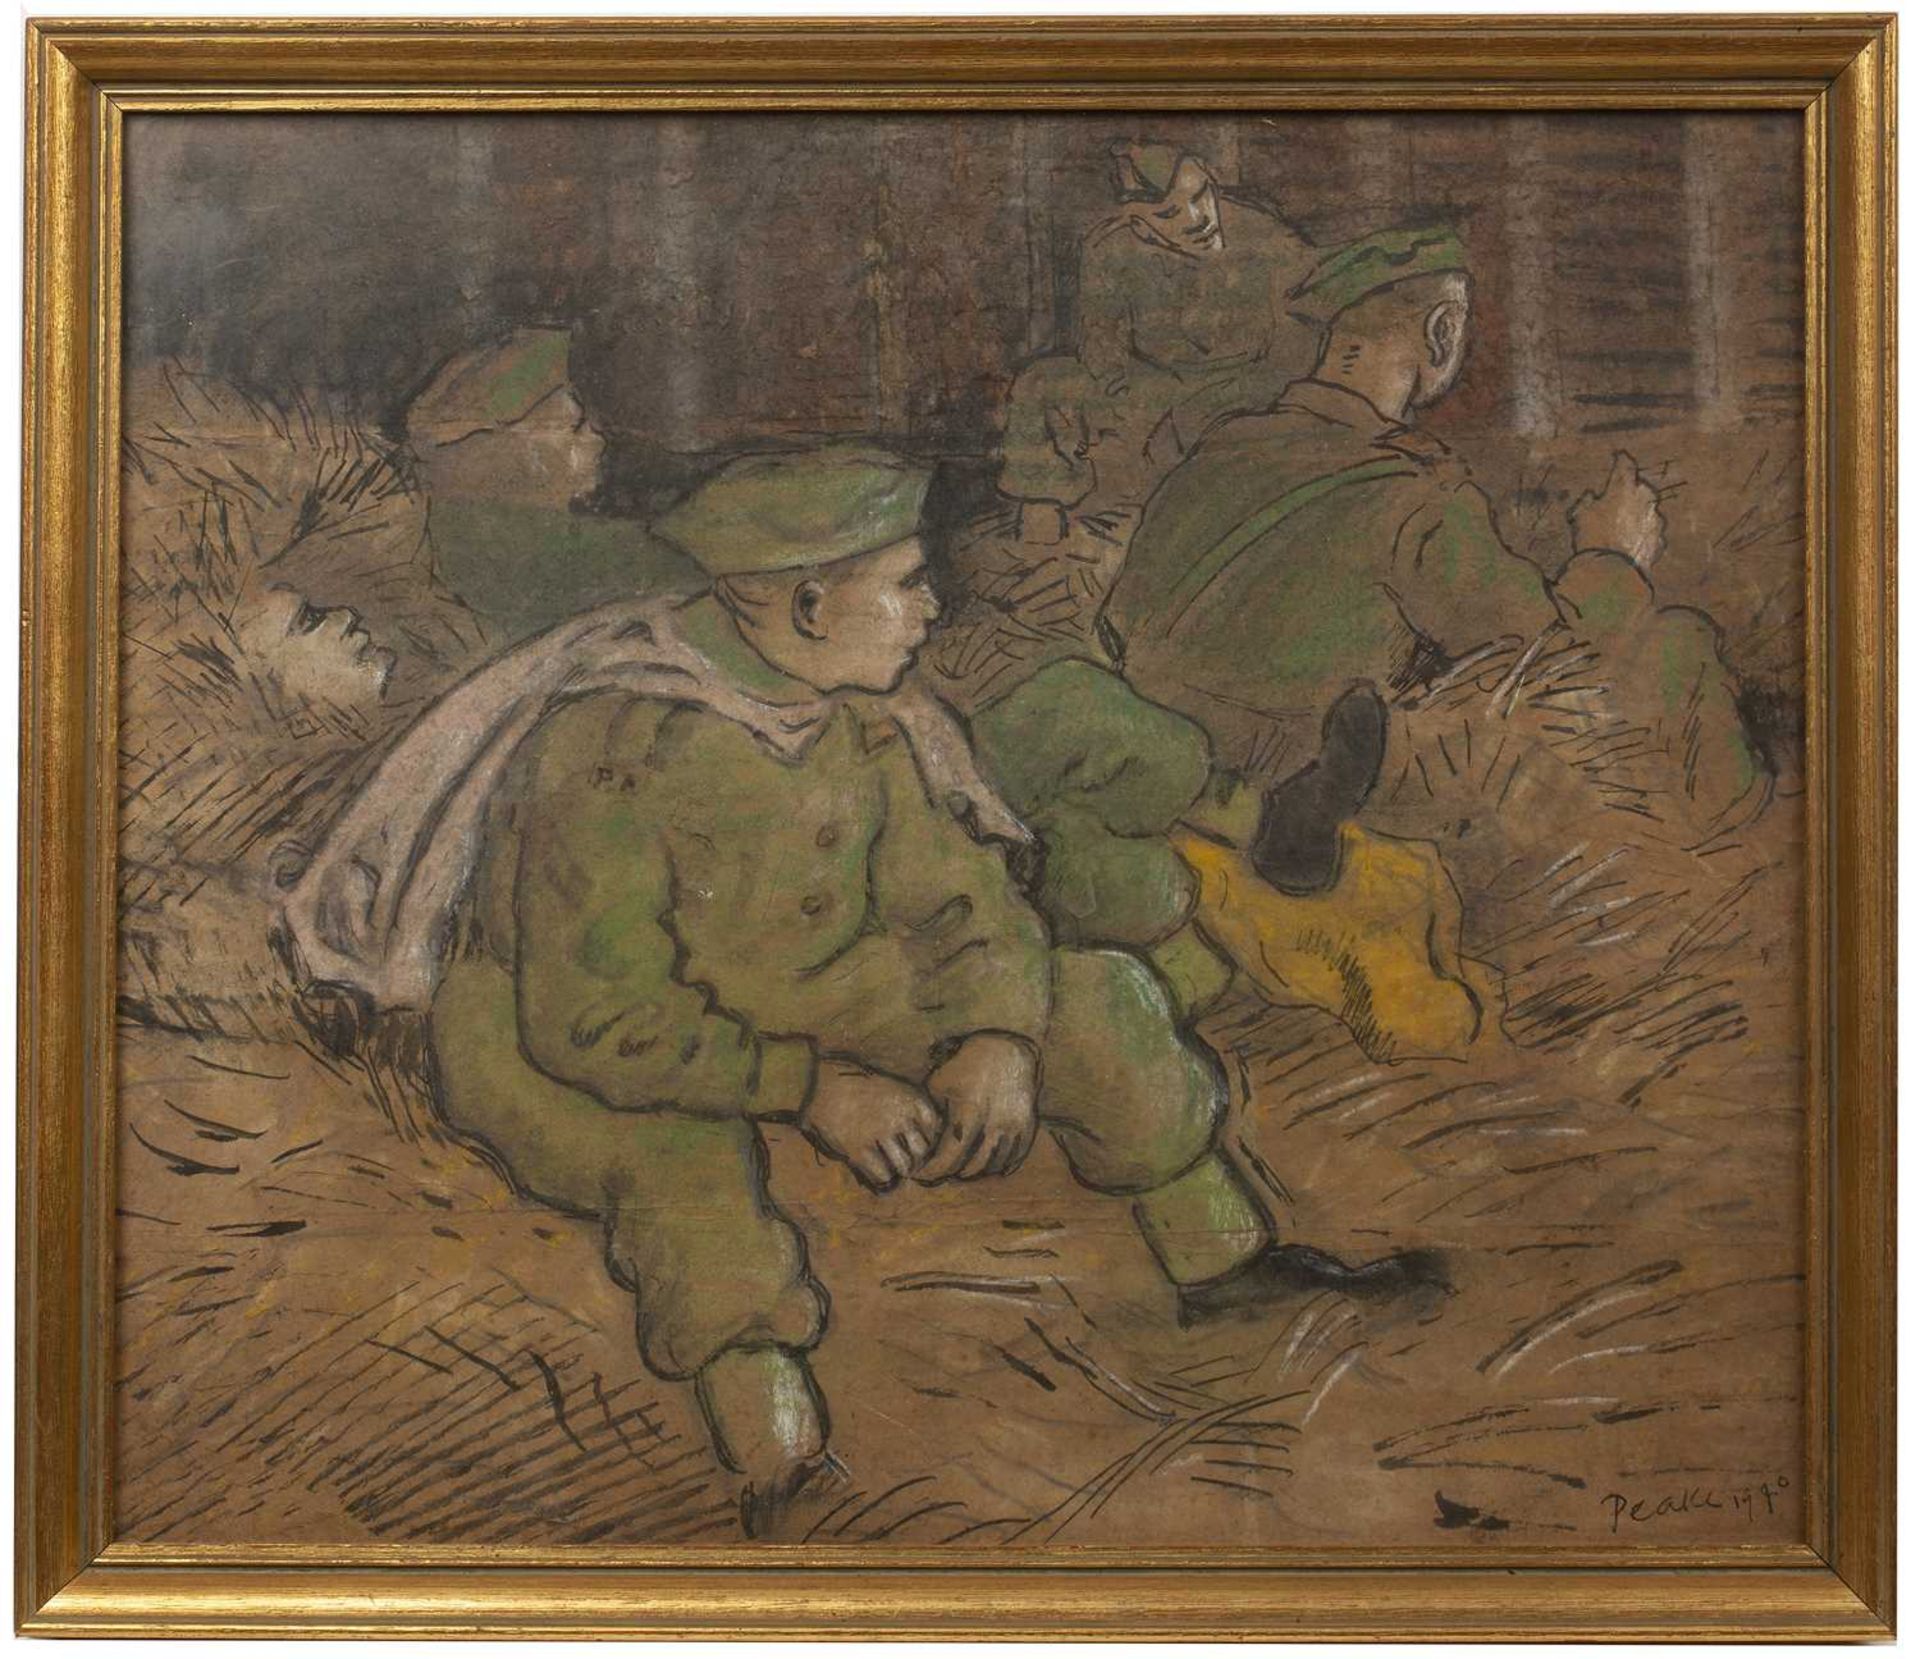 Mervyn Peake (1911-1968) Soldiers Sheltering in a Barn, 1940 signed and dated (lower right) - Image 2 of 5